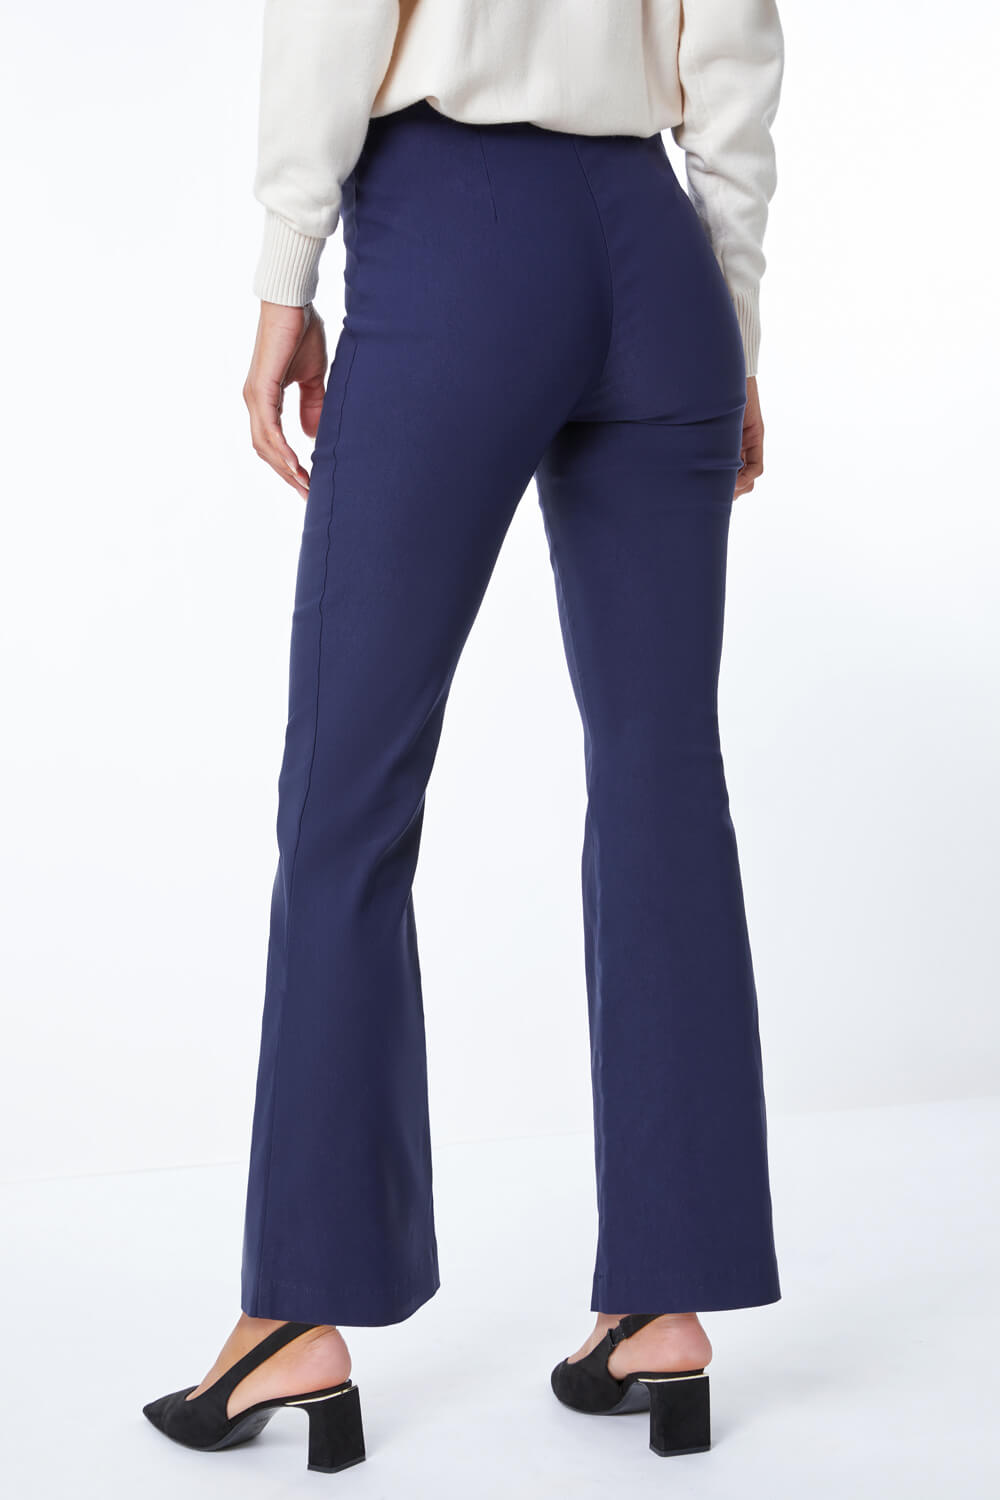 Navy  Full Length Boot Cut Stretch Trouser, Image 4 of 4